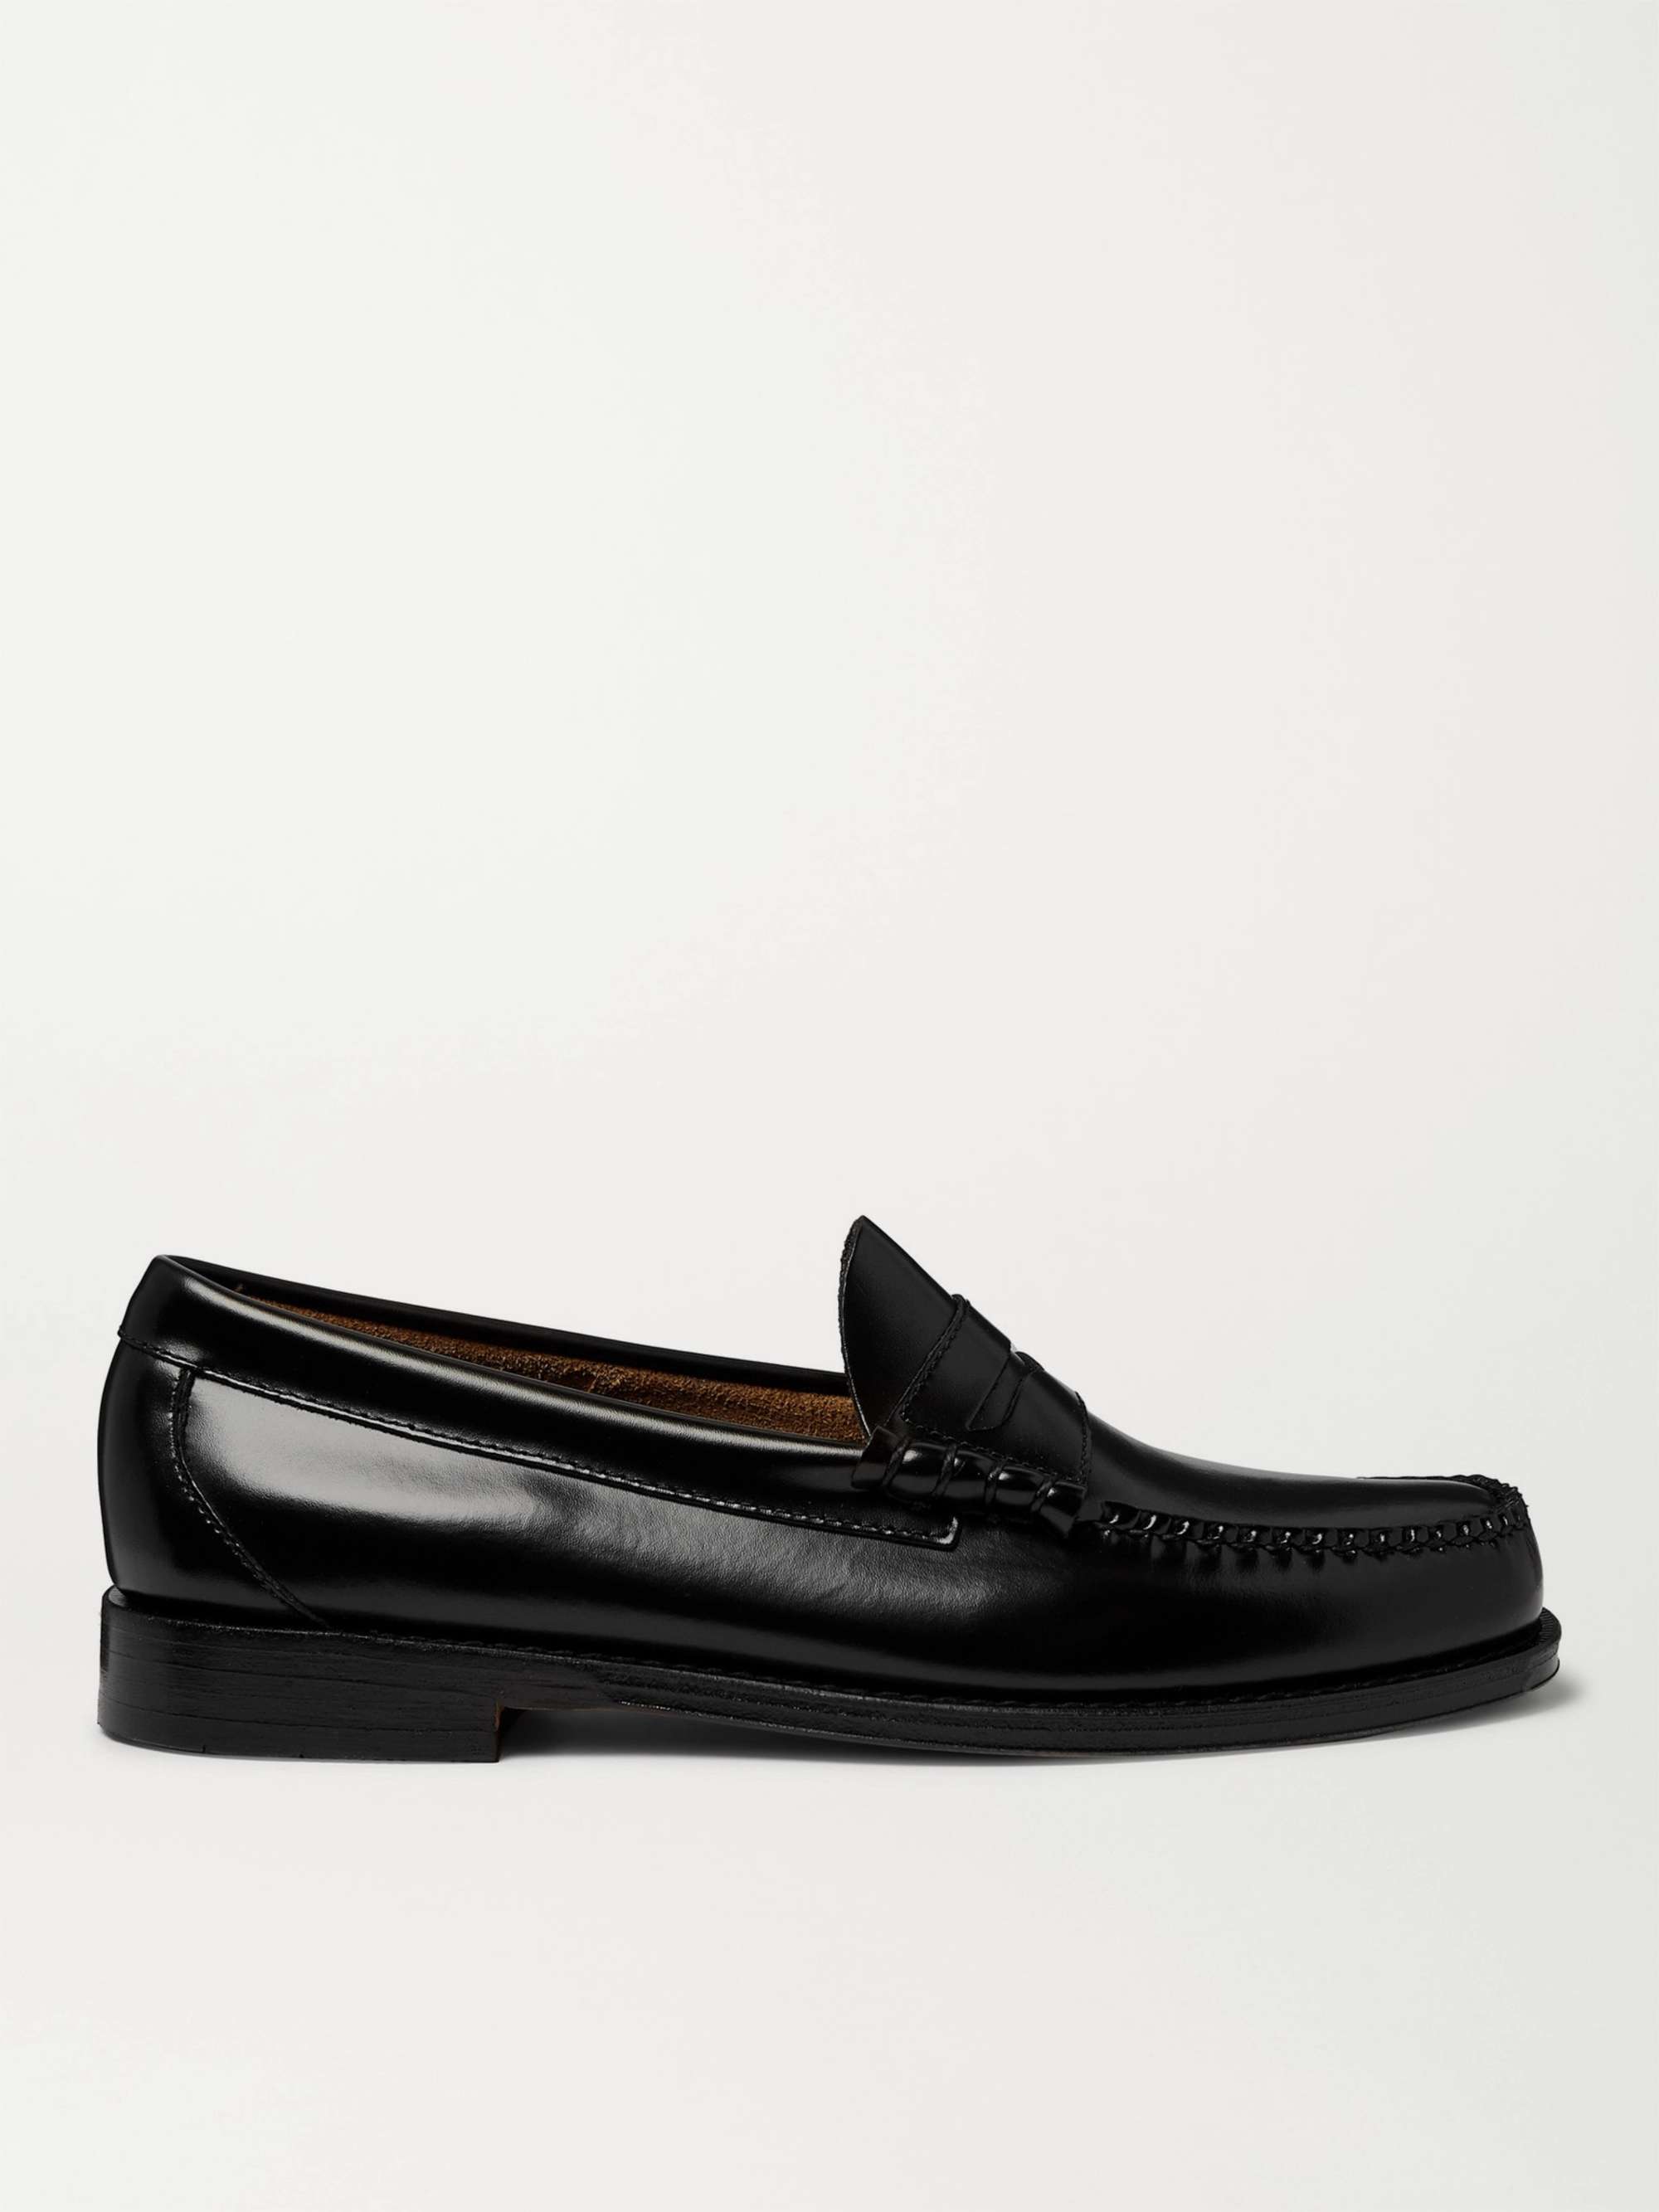 G.H. BASS & Weejuns Heritage Larson Leather Loafers for Men | PORTER